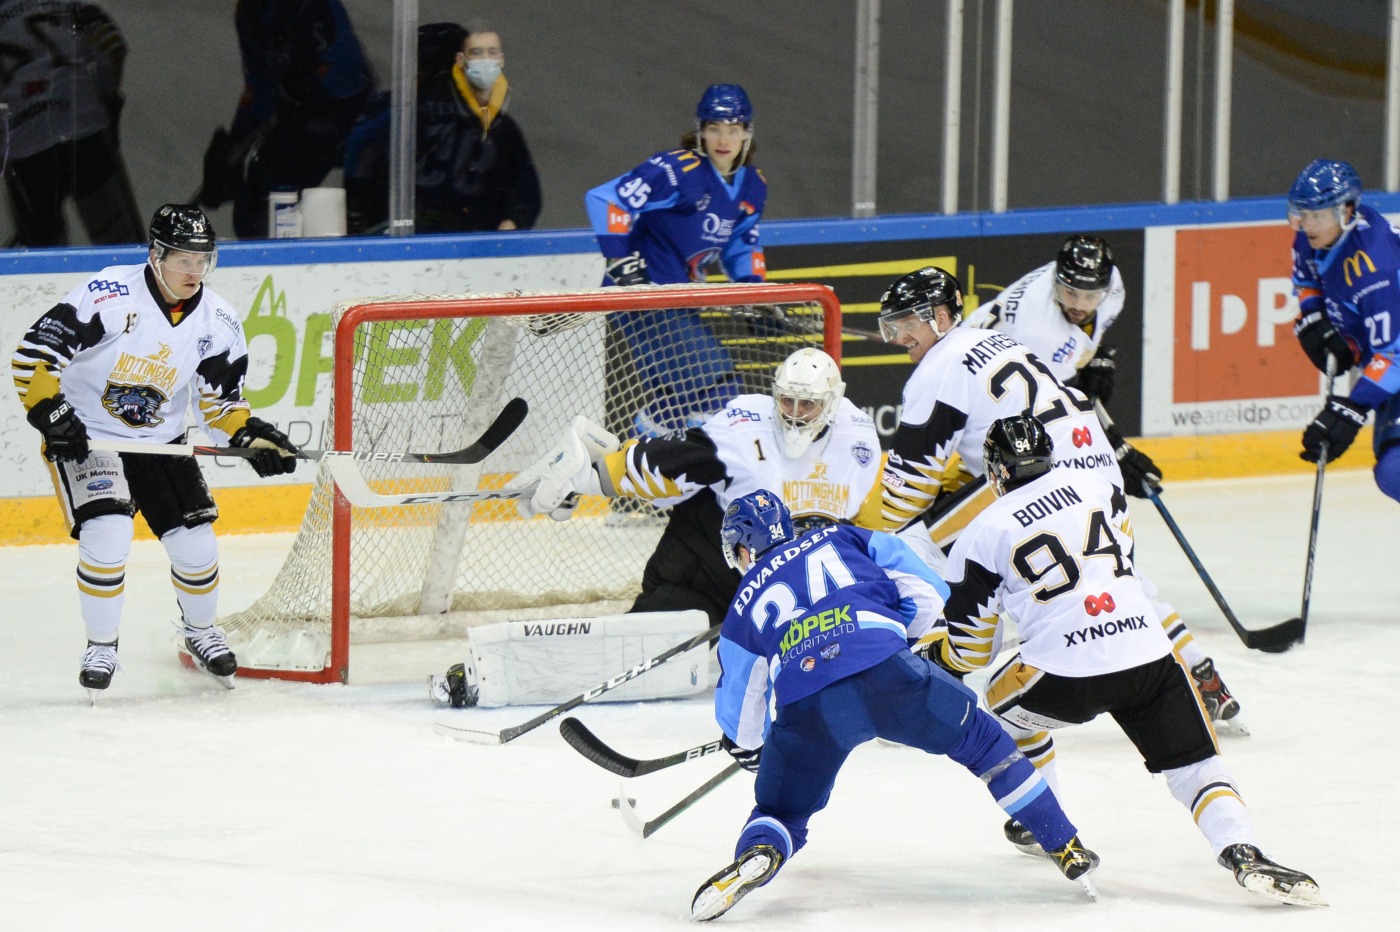 Image: Dean Woolley / Panthers Images